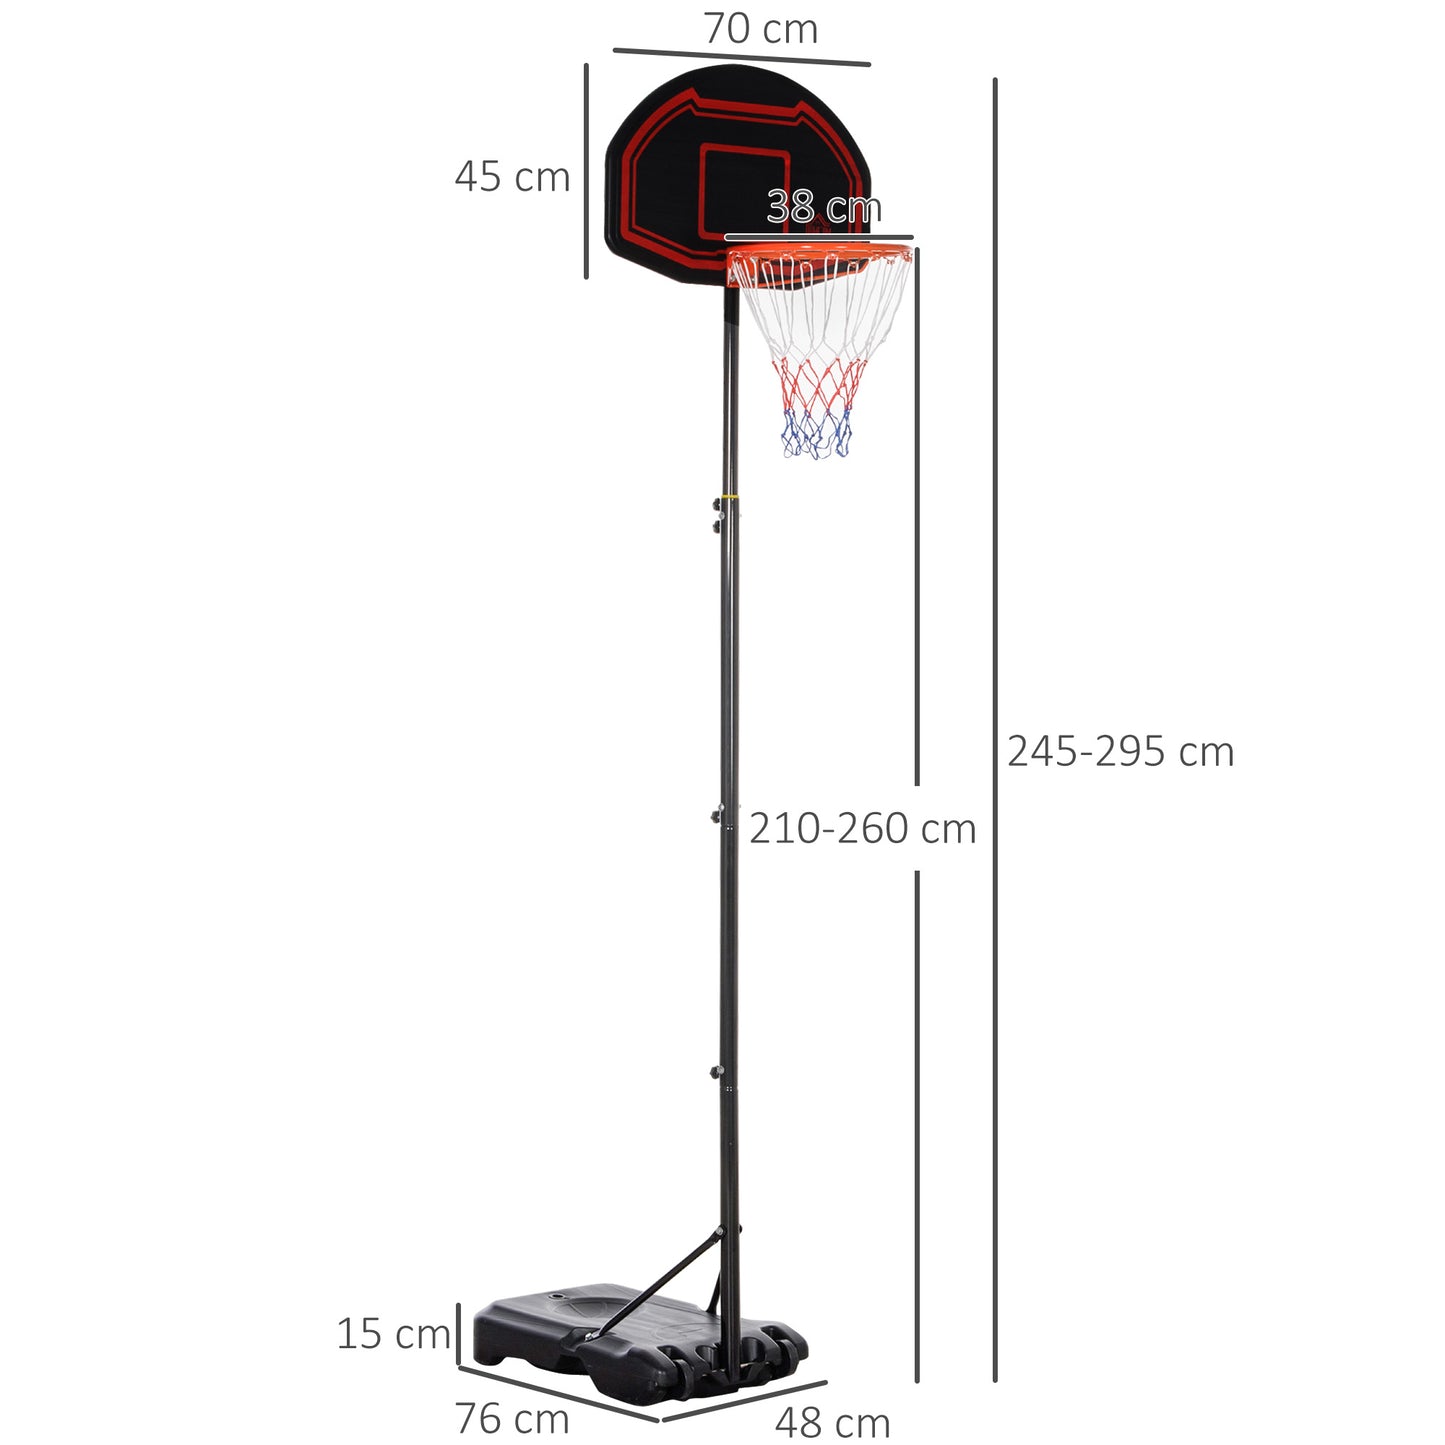 HOMCOM Adjustable Basketball Hoop Stand, with Wheels and Stable Base